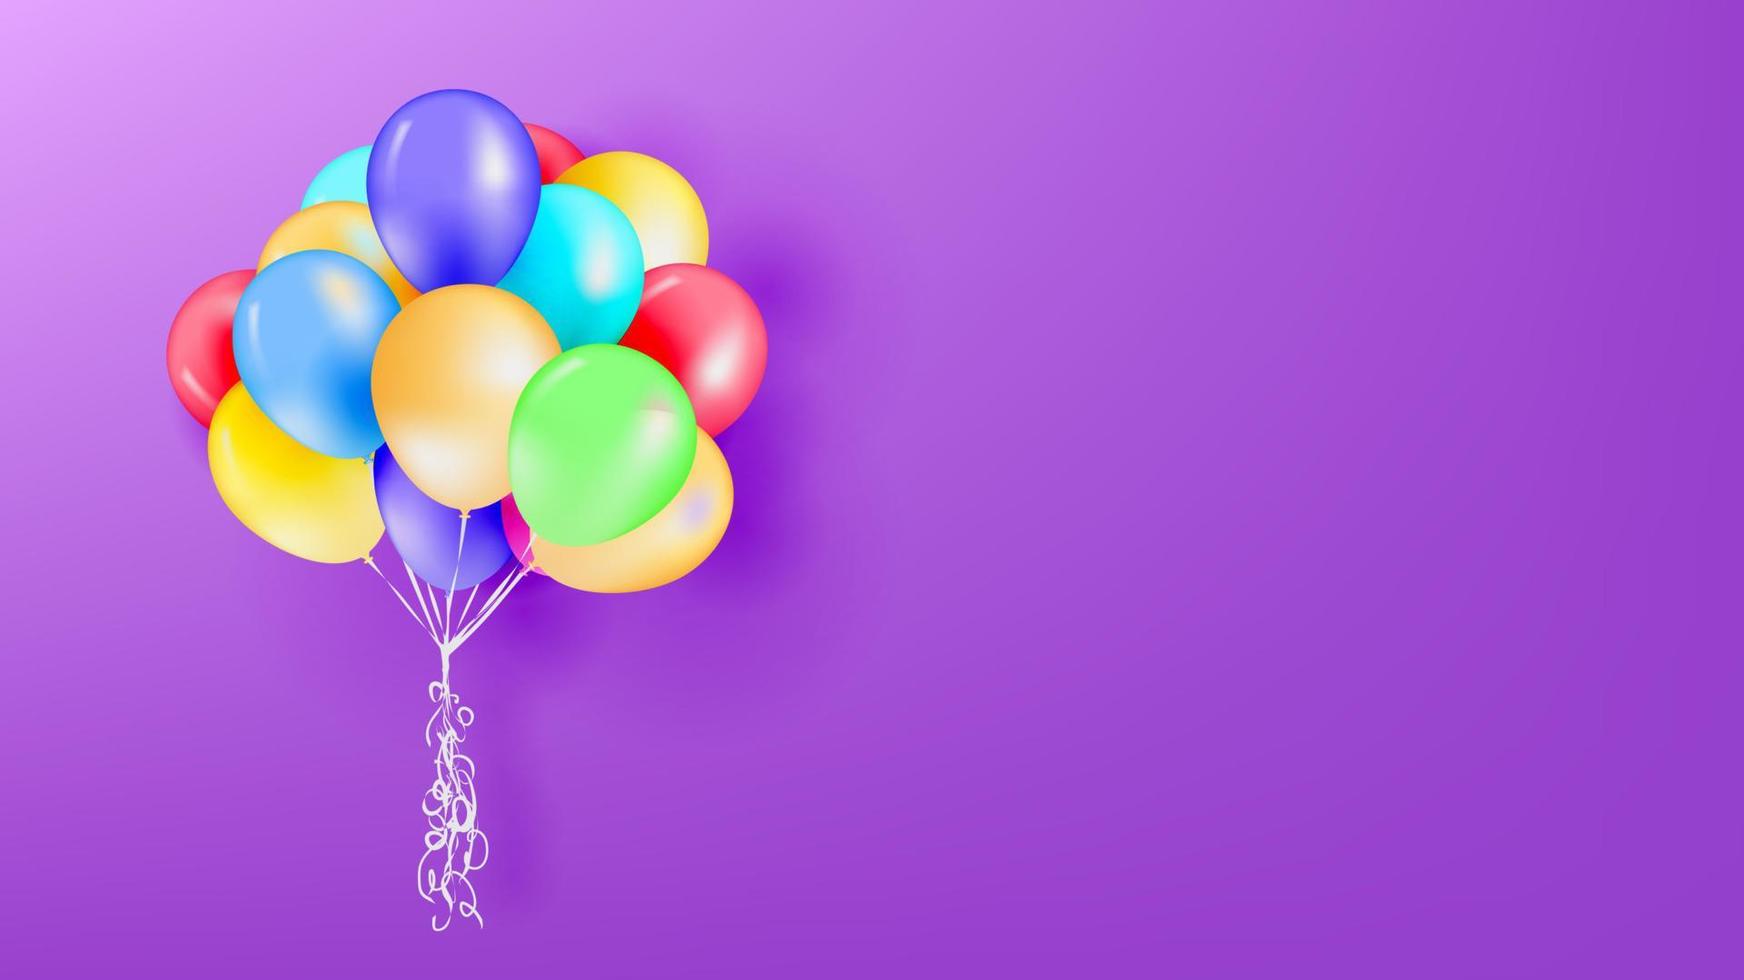 Bunch of bright balloons and space for text against color background vector